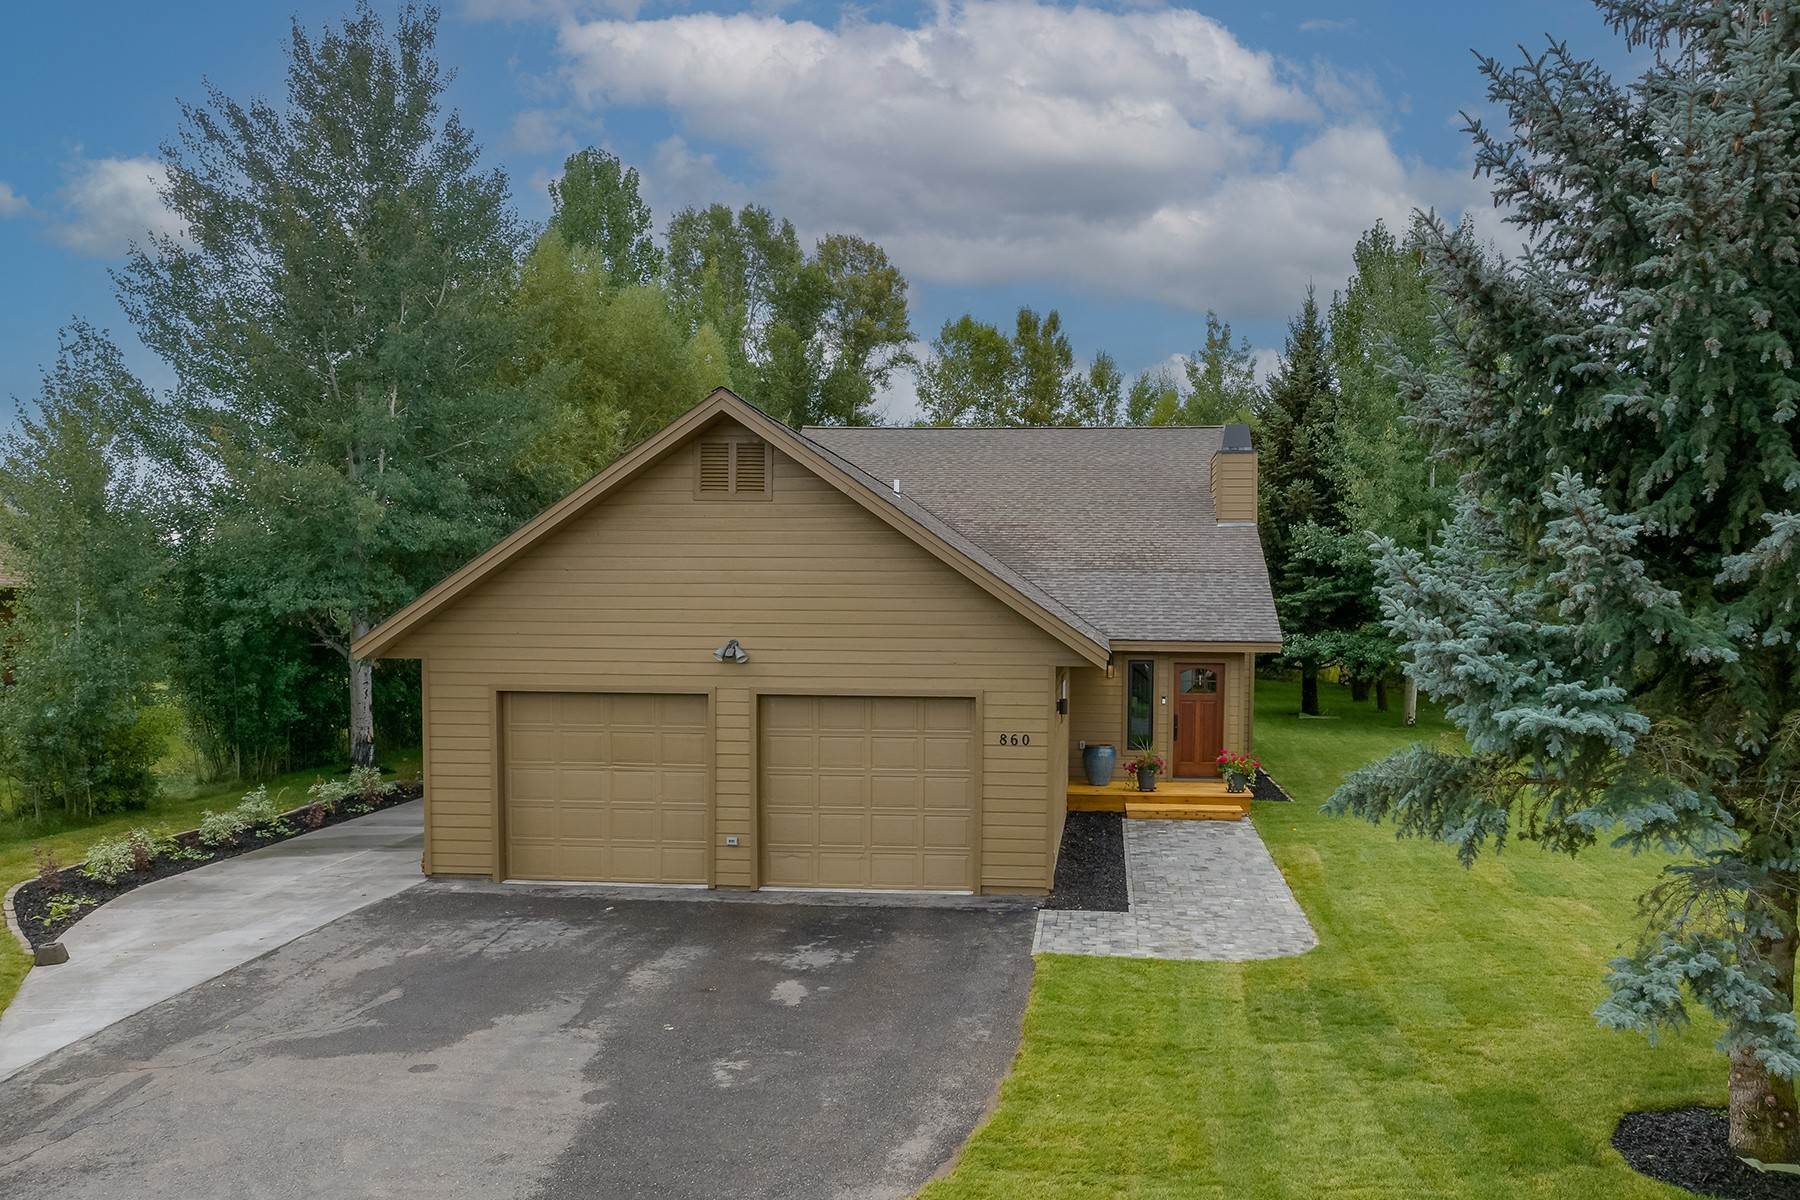 27. Single Family Homes for Sale at Freshly Renovated Home in Indian Trails 860 Seneca Ln Jackson, Wyoming 83002 United States